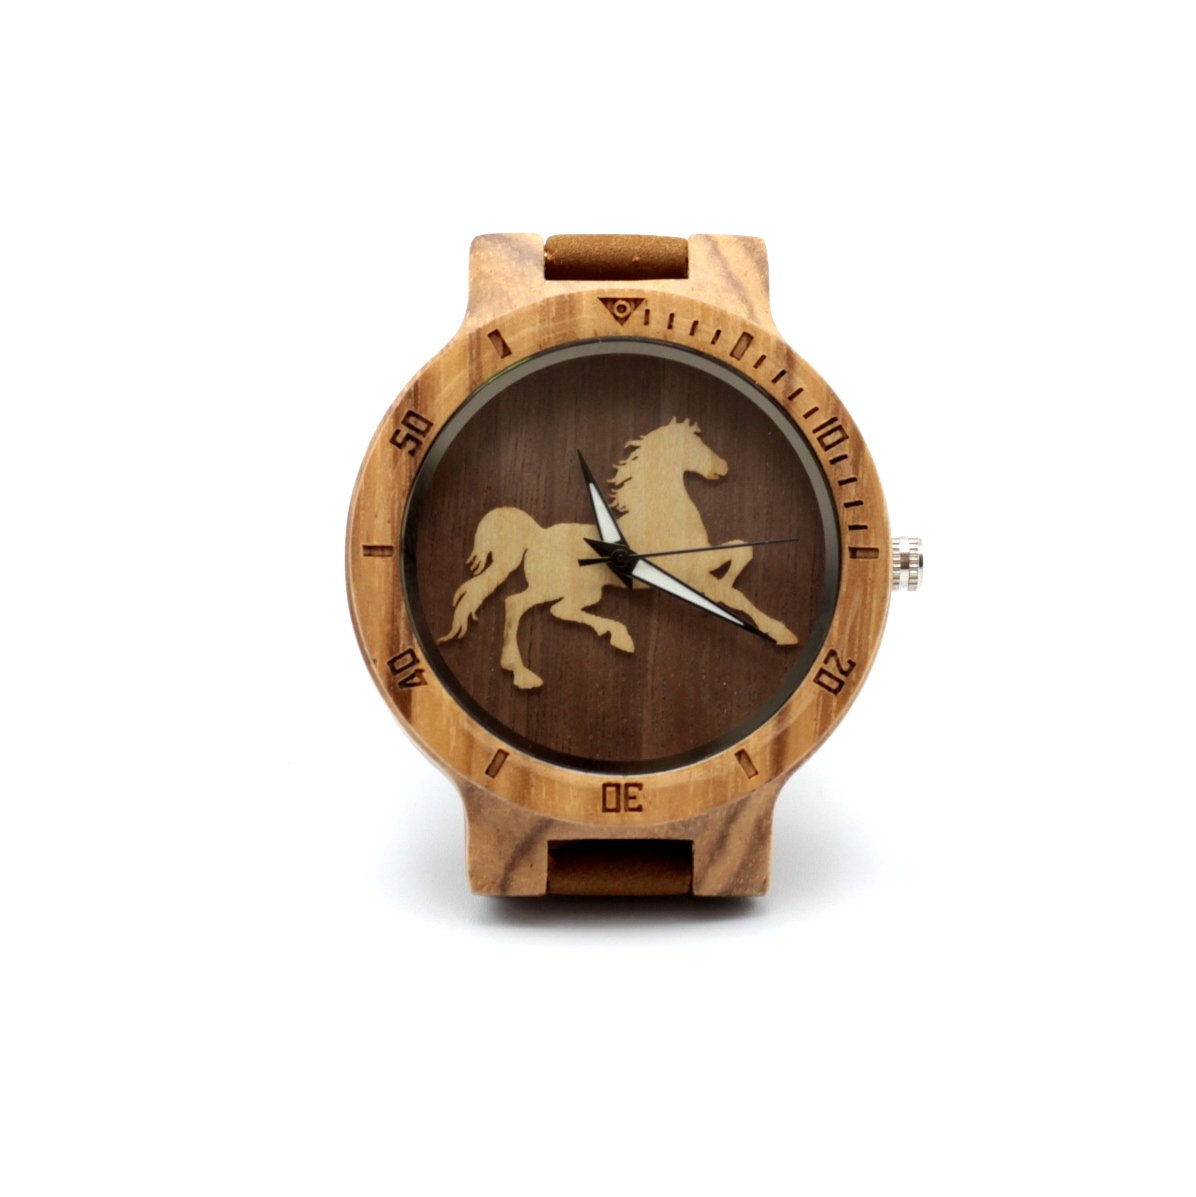 Ladies Wooden Watch with Light Tan Leather Strap - THE EQUIS LADY - Hashtag Bamboo